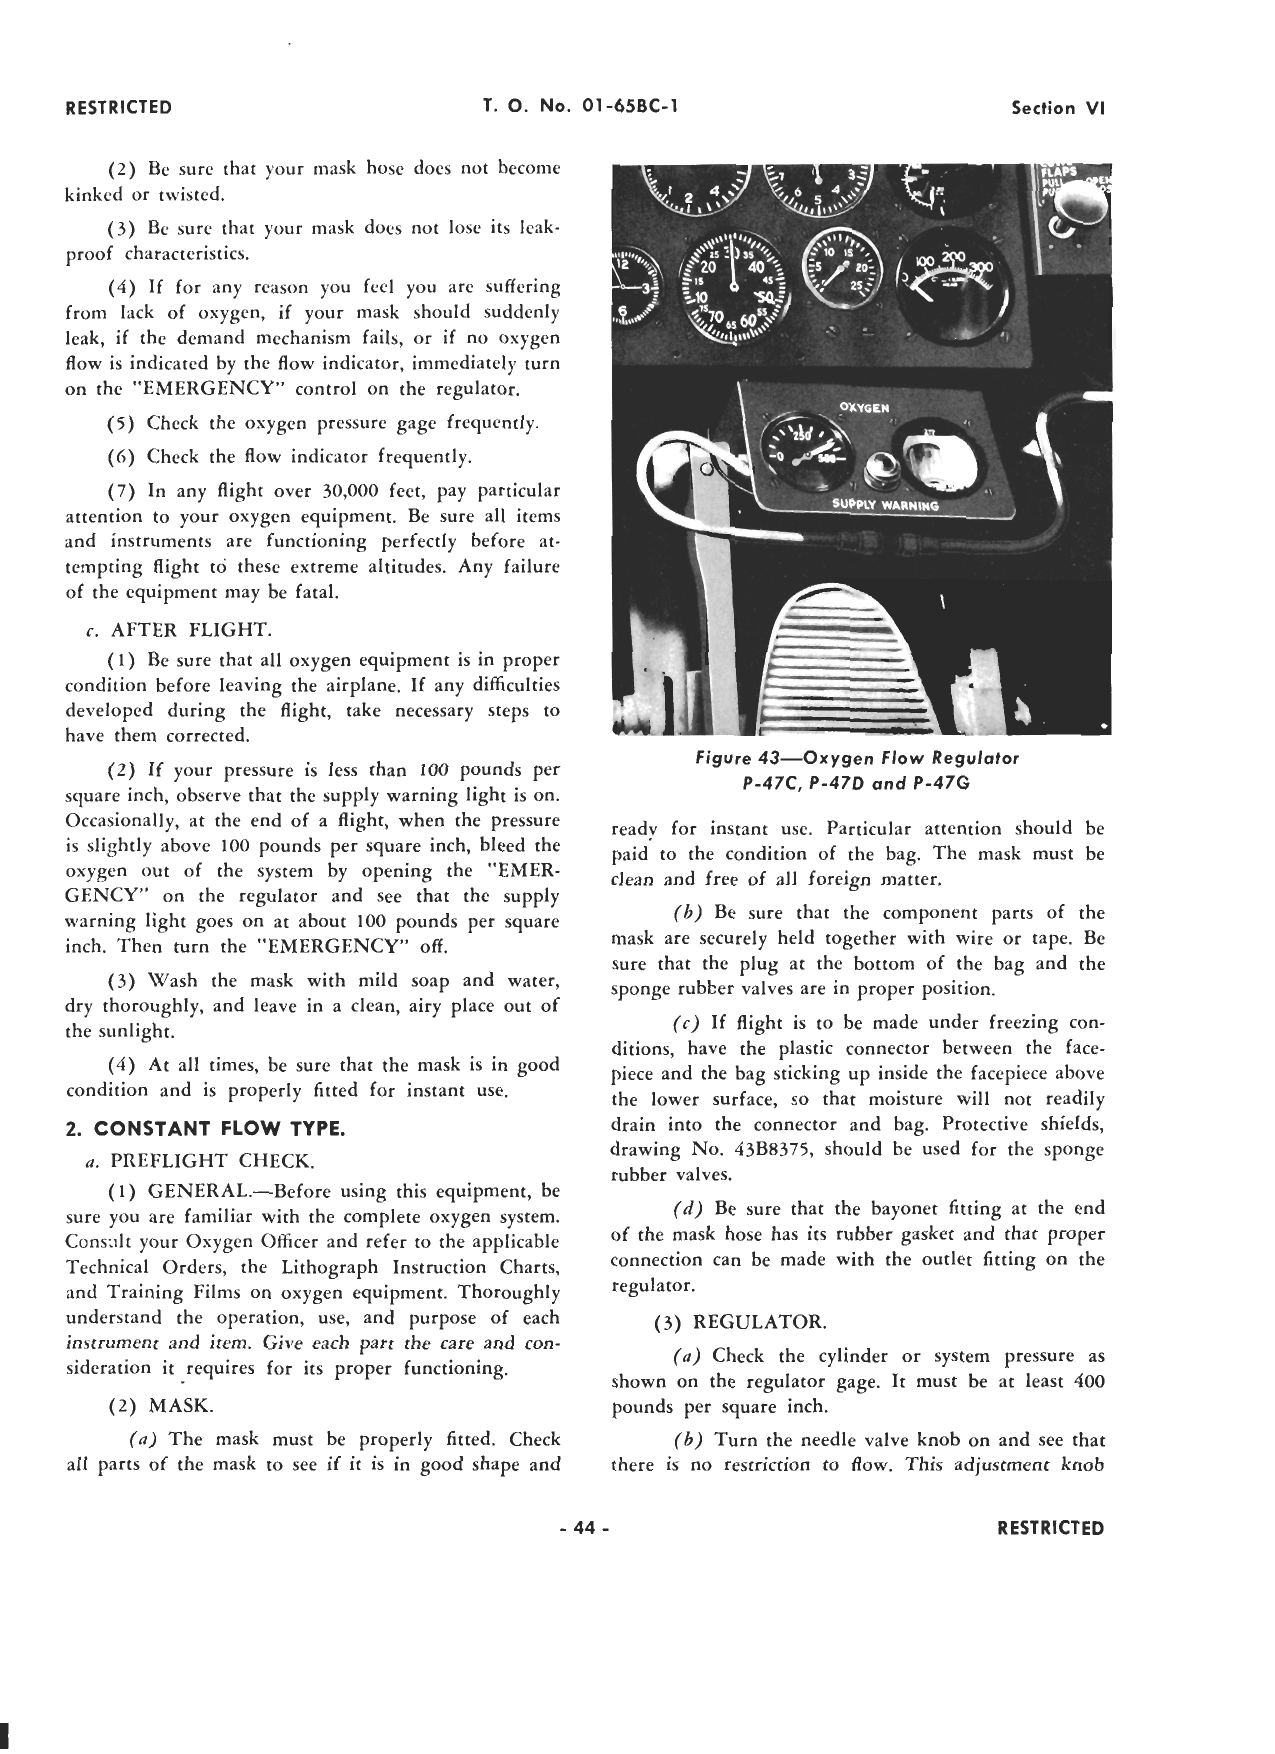 Sample page 48 from AirCorps Library document: Pilot's Operating Instructions P-47B, C, D, G